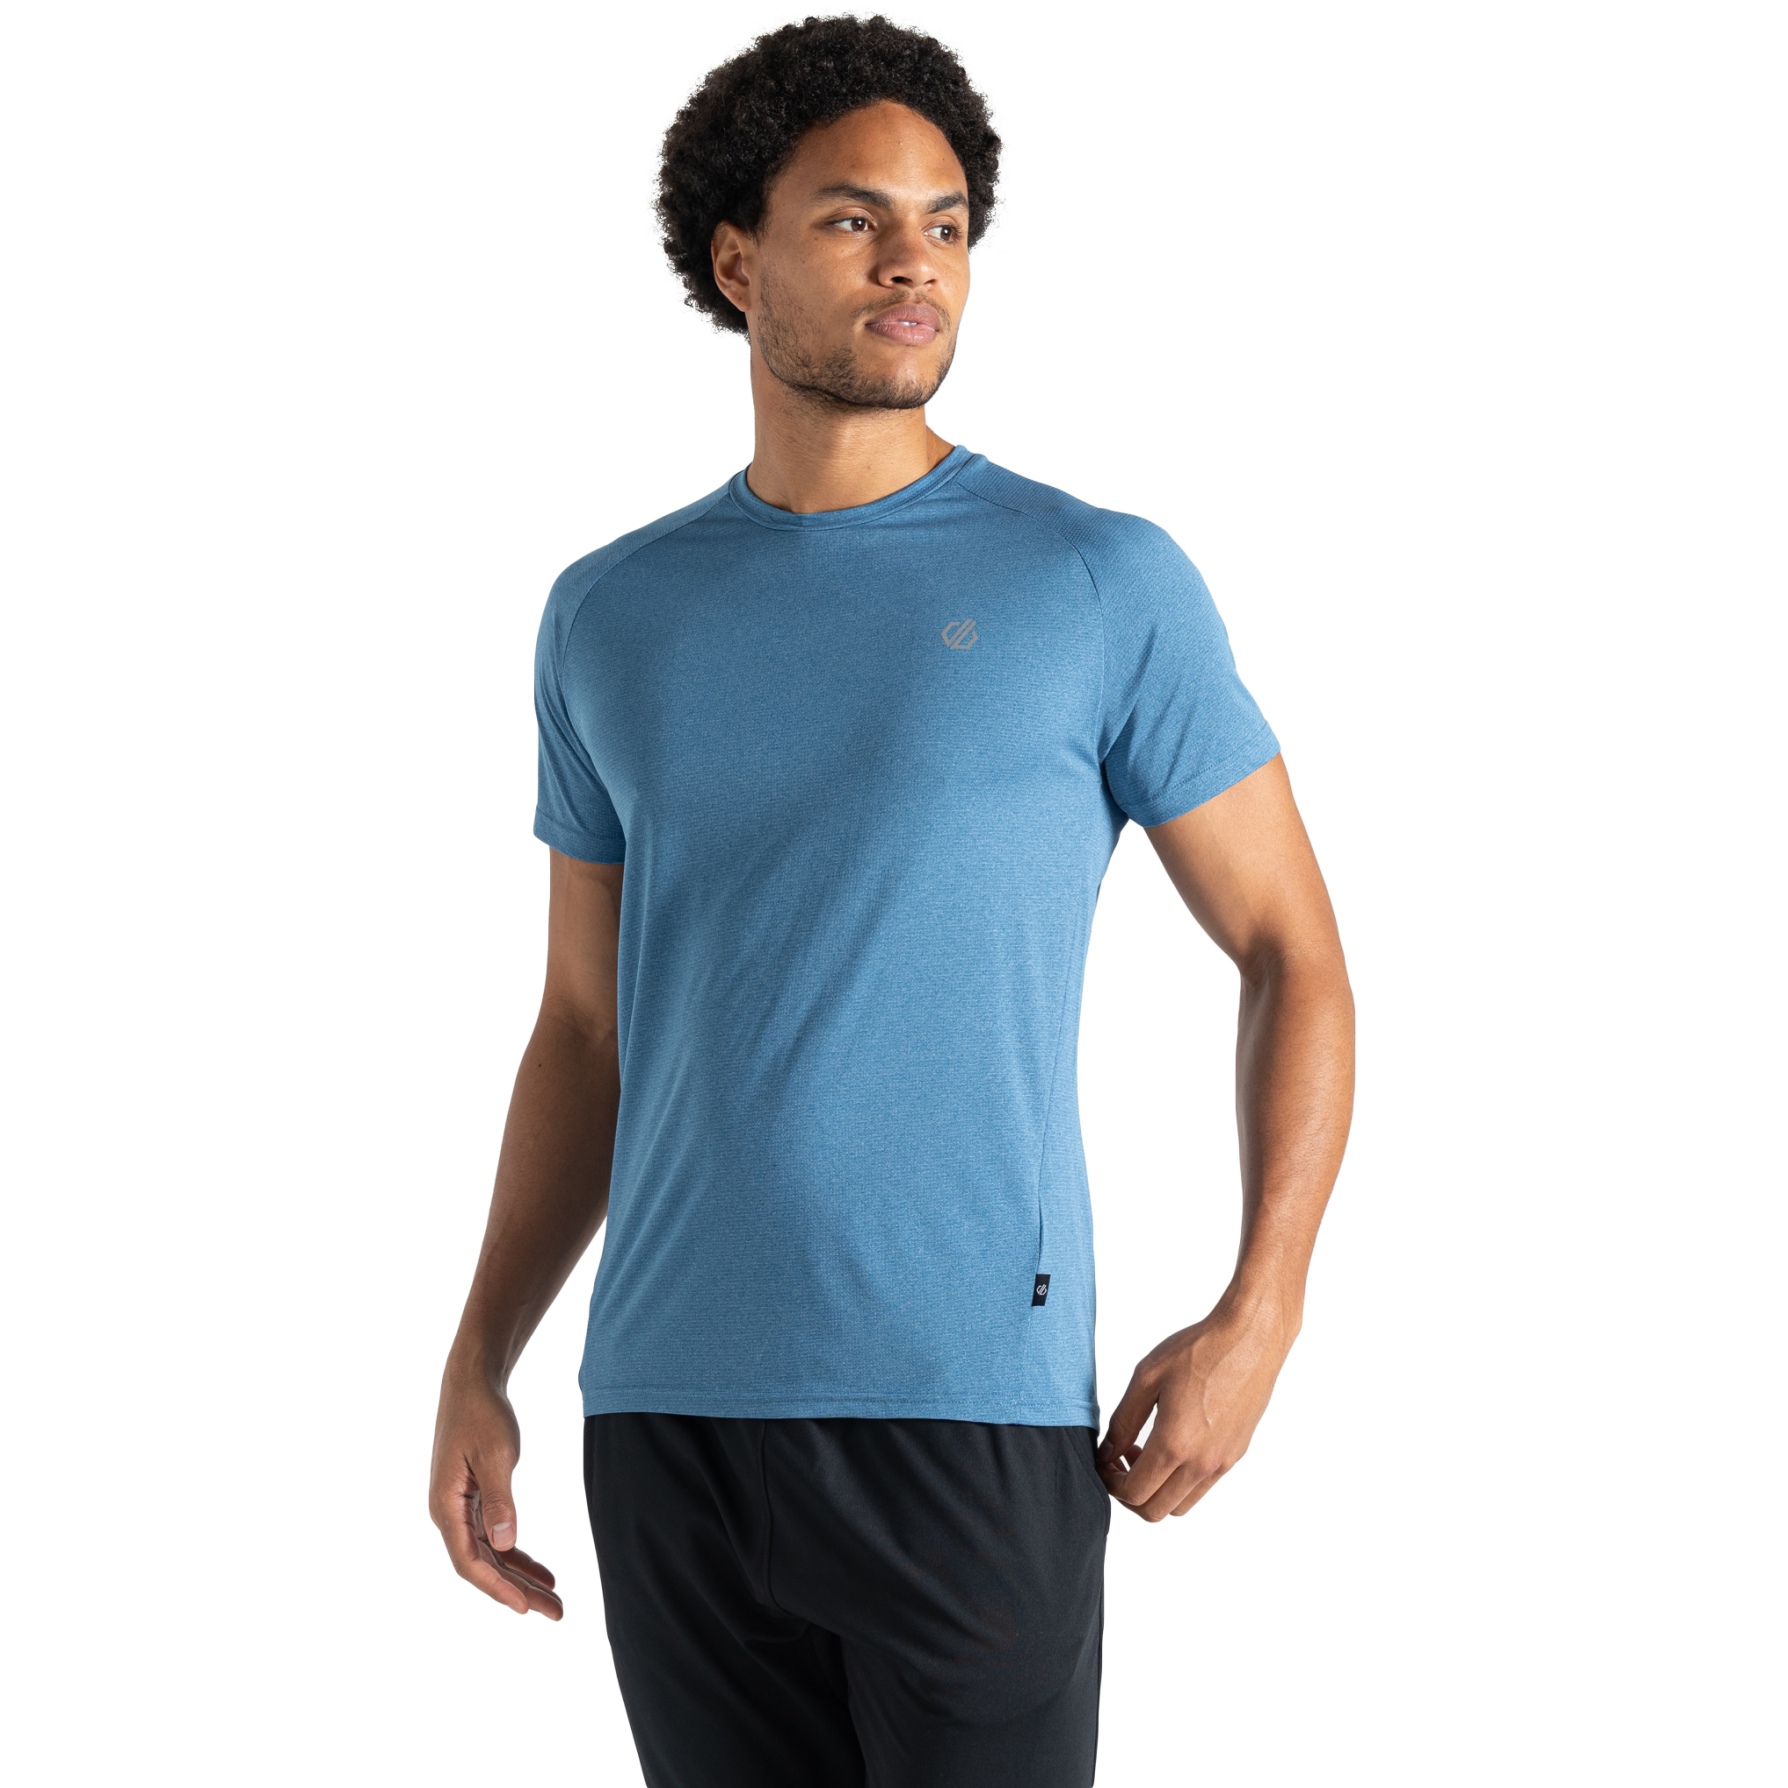 Picture of Dare 2b Accelerate Tee Men - Q3S Coronet Blue Marl